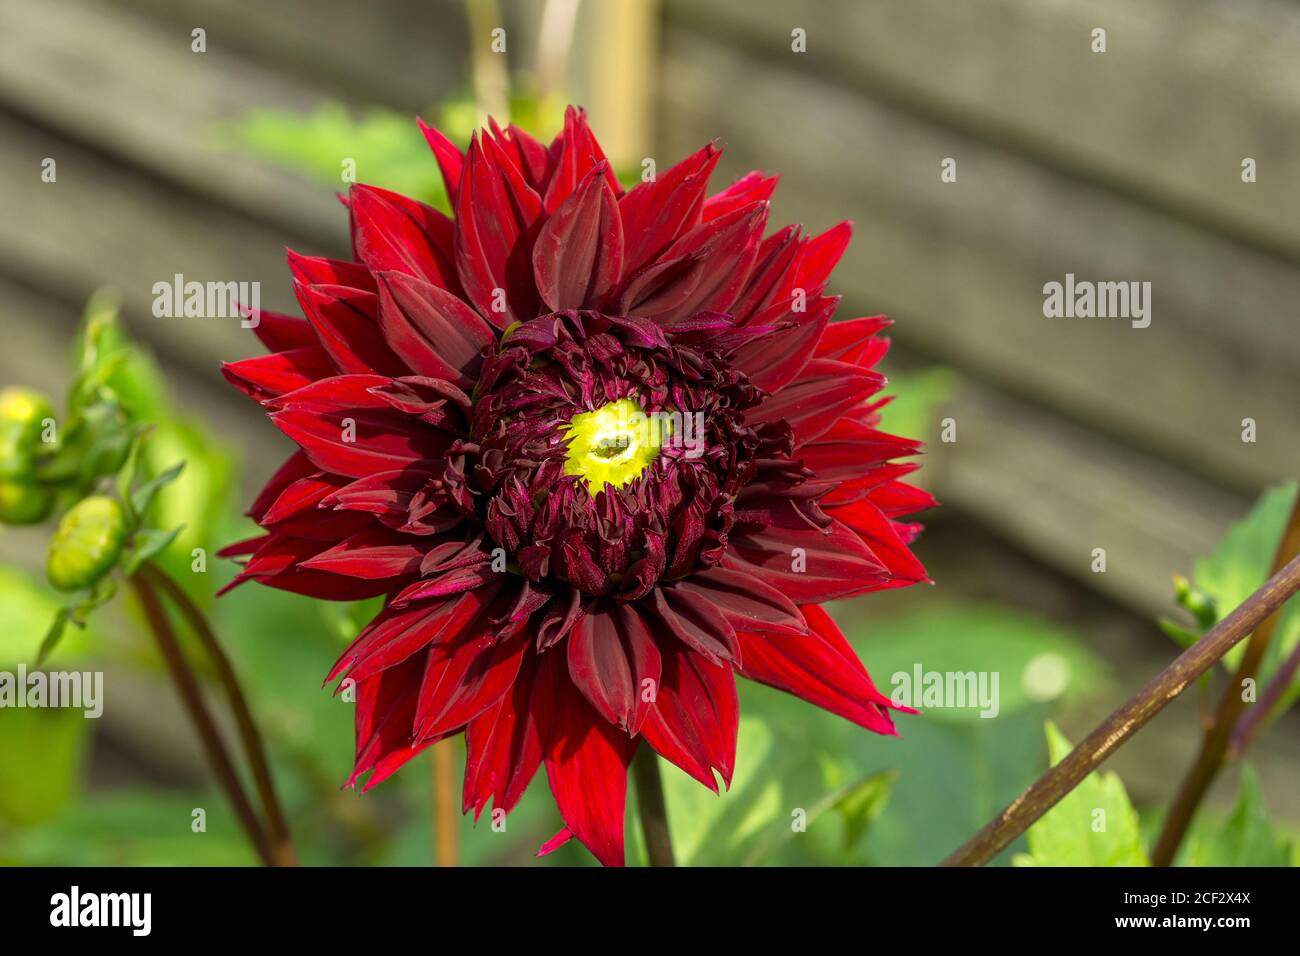 Dahlia 'Black Touch' flower bloom.  Family Asteraceae. Stock Photo